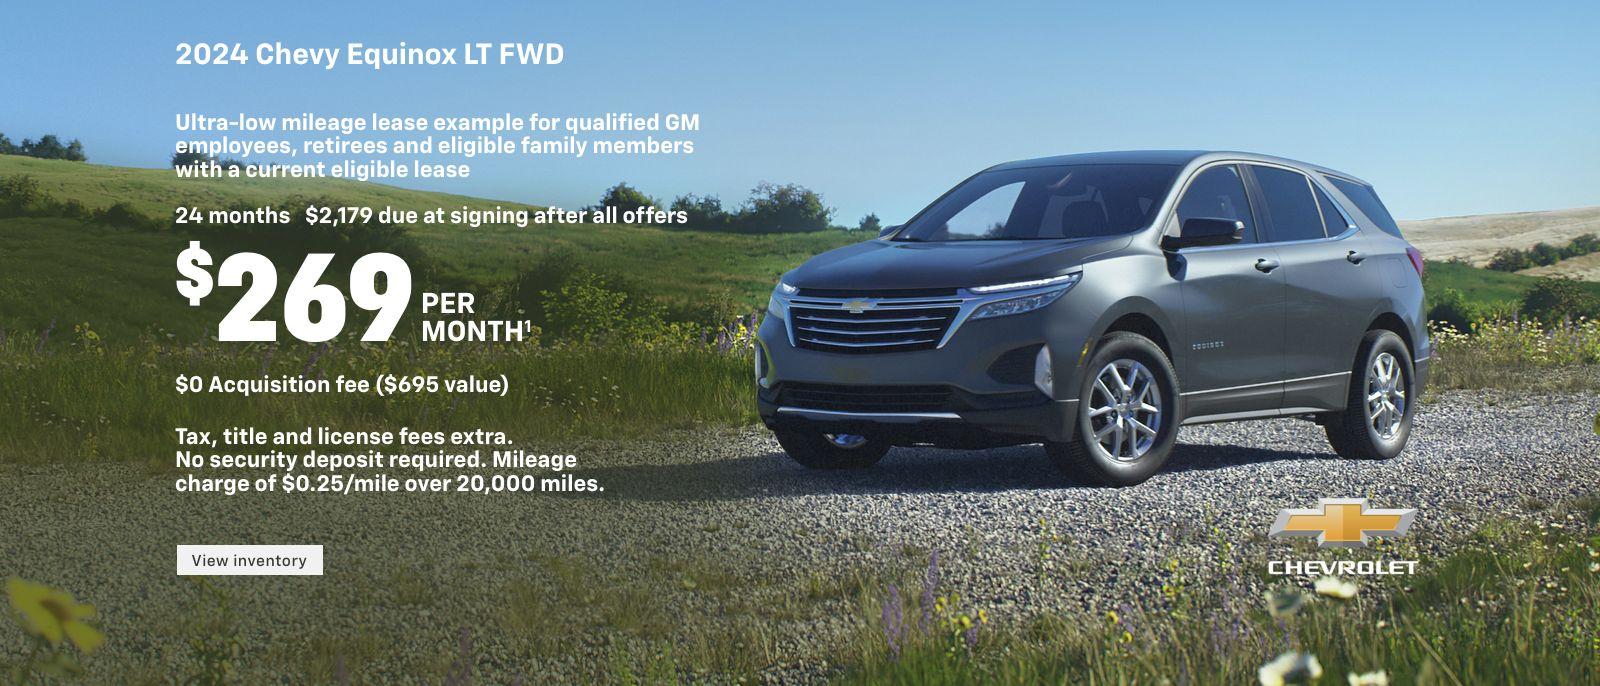 2024 Chevy Equinox LT FWD. Ultra-low mileage lease example for qualified GM employees, retirees and eligible family members with a current eligible lease. $269 per month. 24 months. $2,179 due at signing after all offers. $0 Acquisition fee ($695 value). Tax, title and license fees extra. No security deposit required. Mileage charge of $0.25/mile over 20,000 miles.